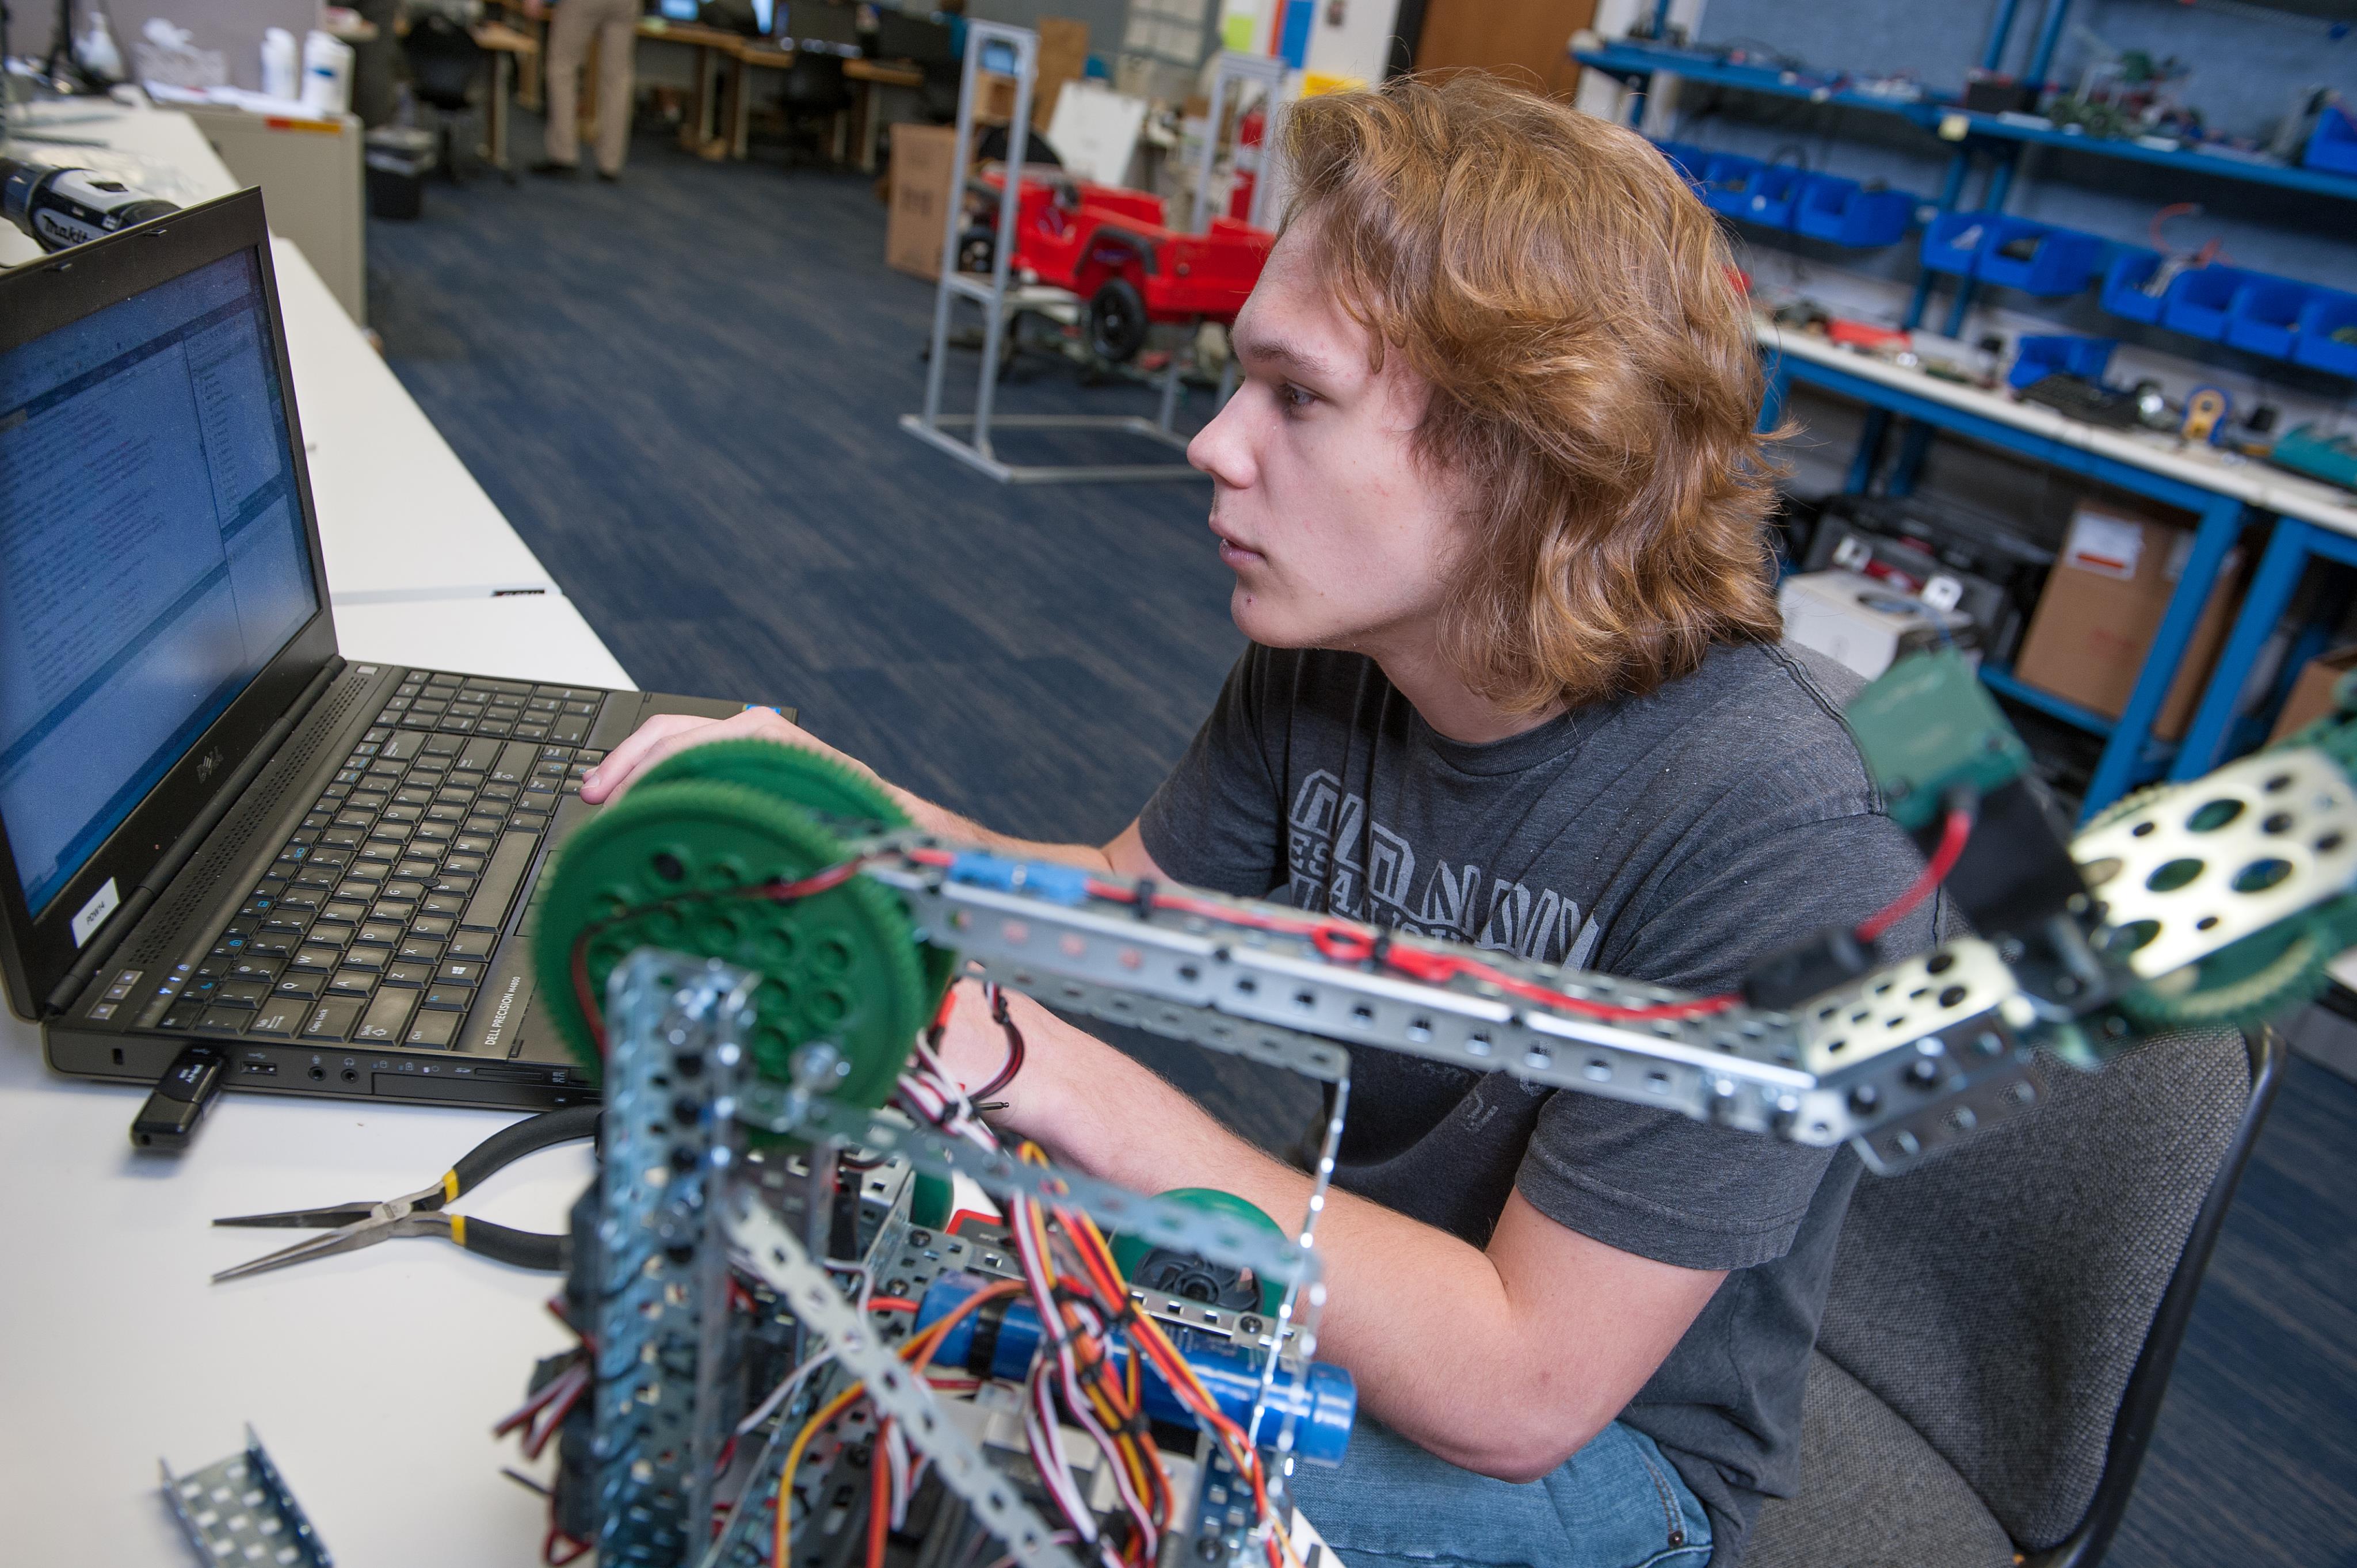 Male student in the Programming class works on programming some automation equipment